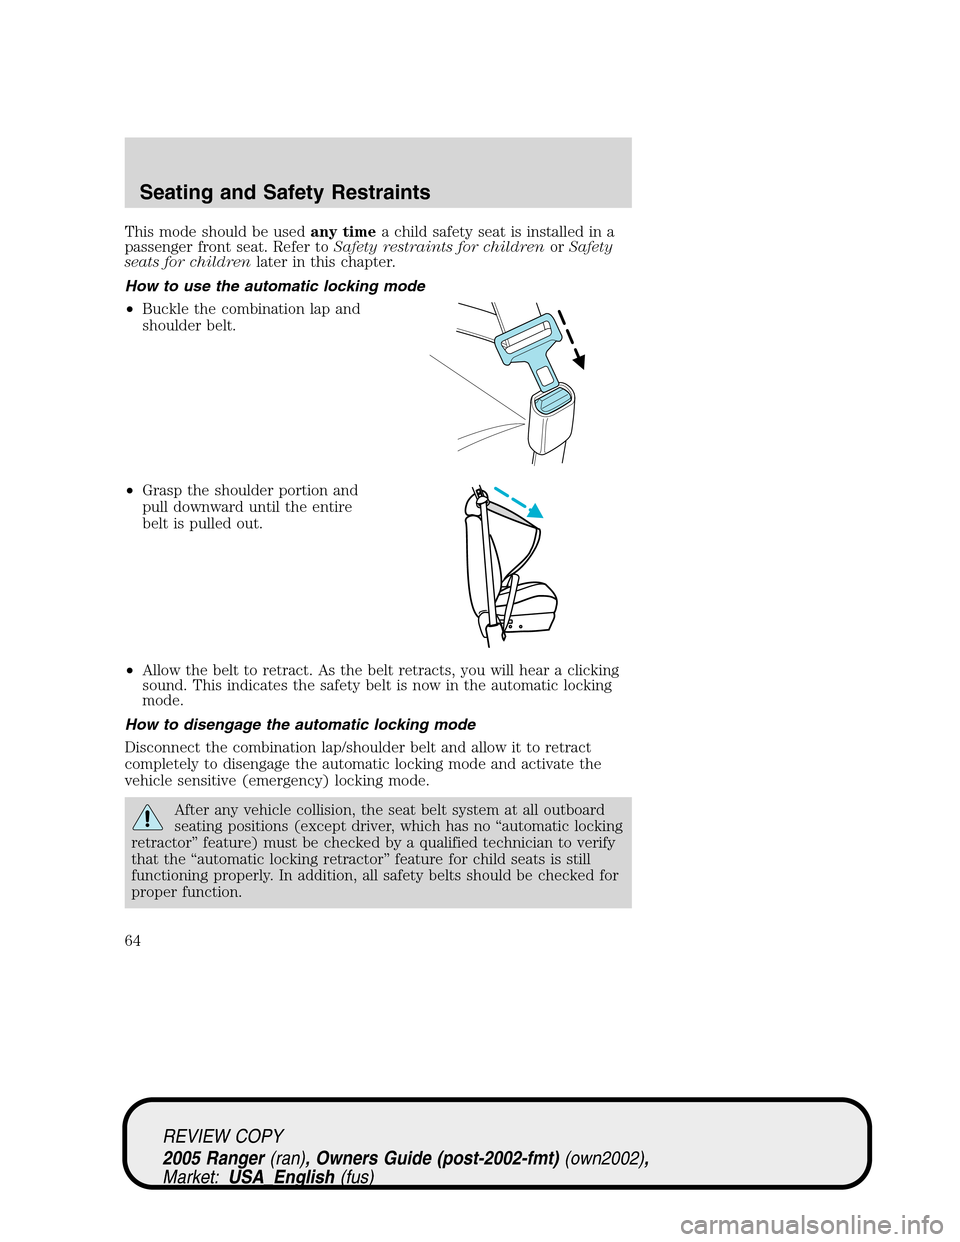 FORD RANGER 2005 2.G Repair Manual This mode should be usedany timea child safety seat is installed in a
passenger front seat. Refer toSafety restraints for childrenorSafety
seats for childrenlater in this chapter.
How to use the autom